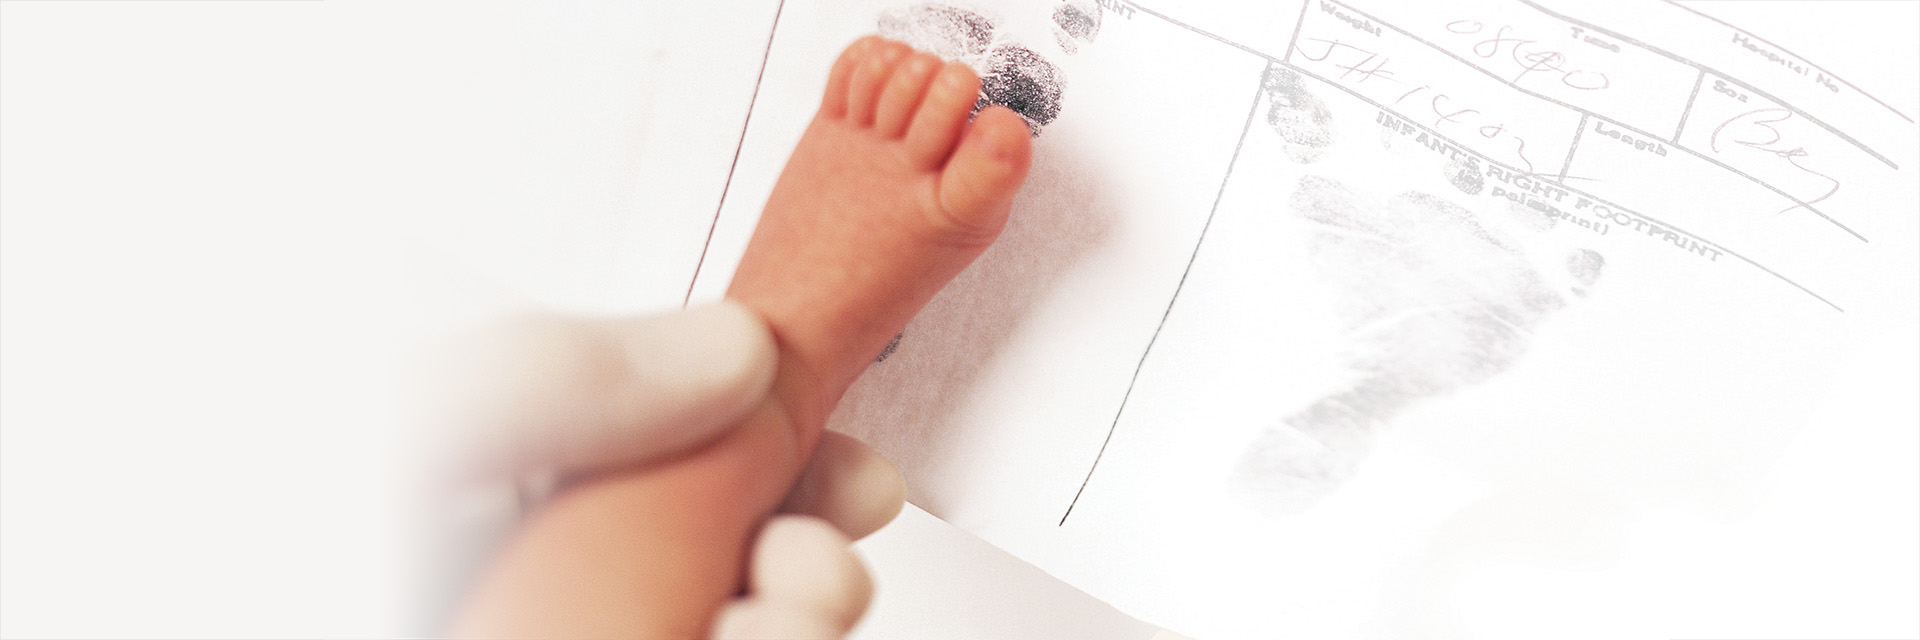 Baby's foot on birth certificate